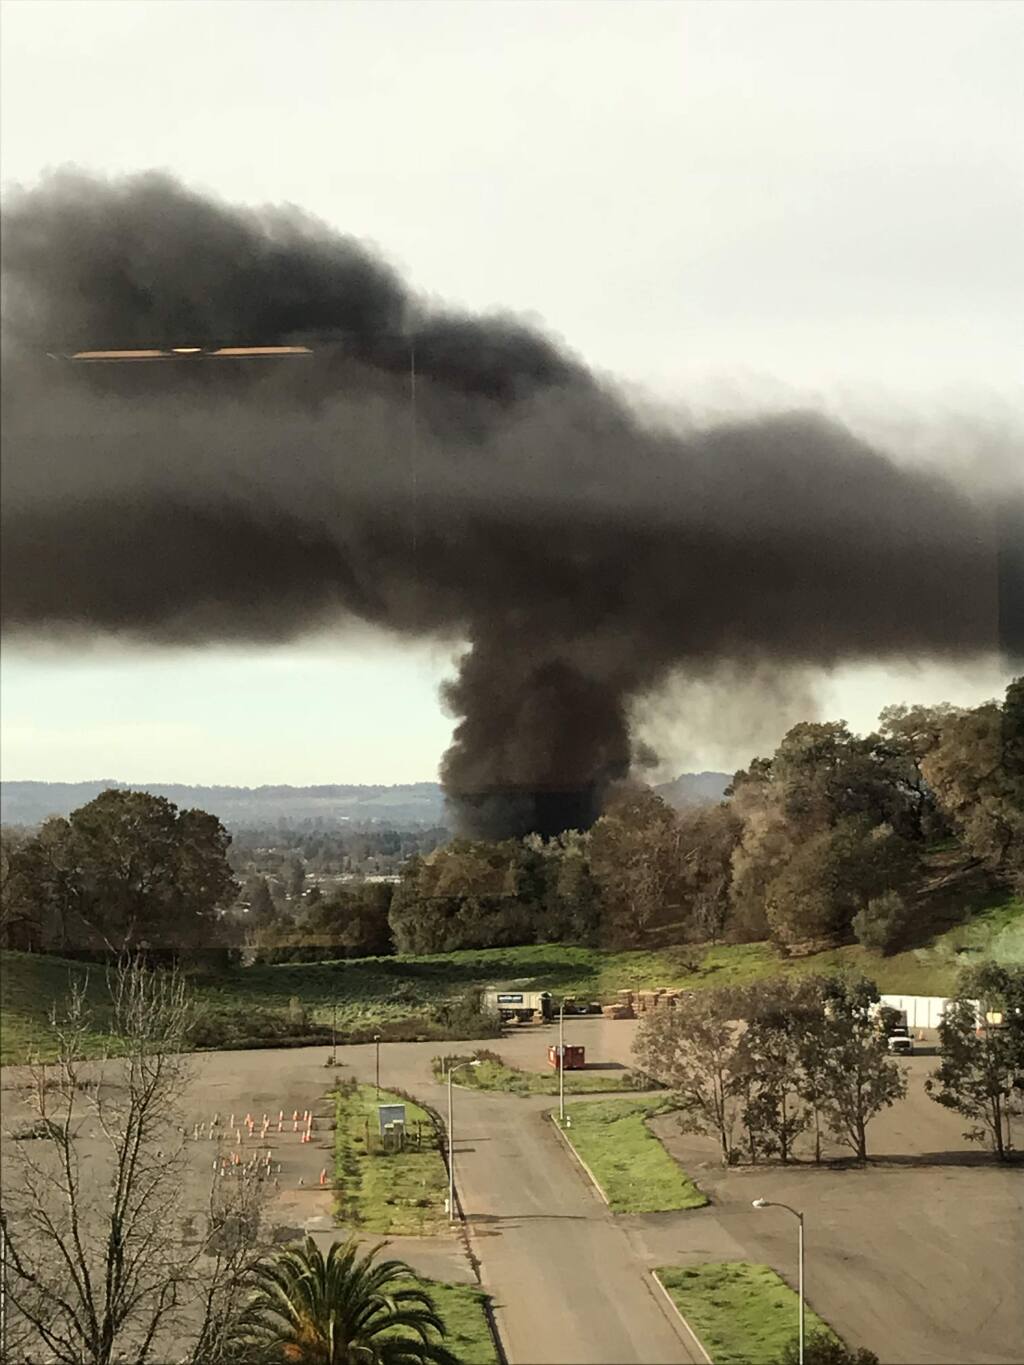 A large truck driving on Fountaingrove Parkway slammed into multiple vehicles, catching fire and sending a huge plume of dark smoke over the northern end of Santa Rosa on Monday, Feb. 5, 2018. (COURTESY OF TINA MONTGOMERY)